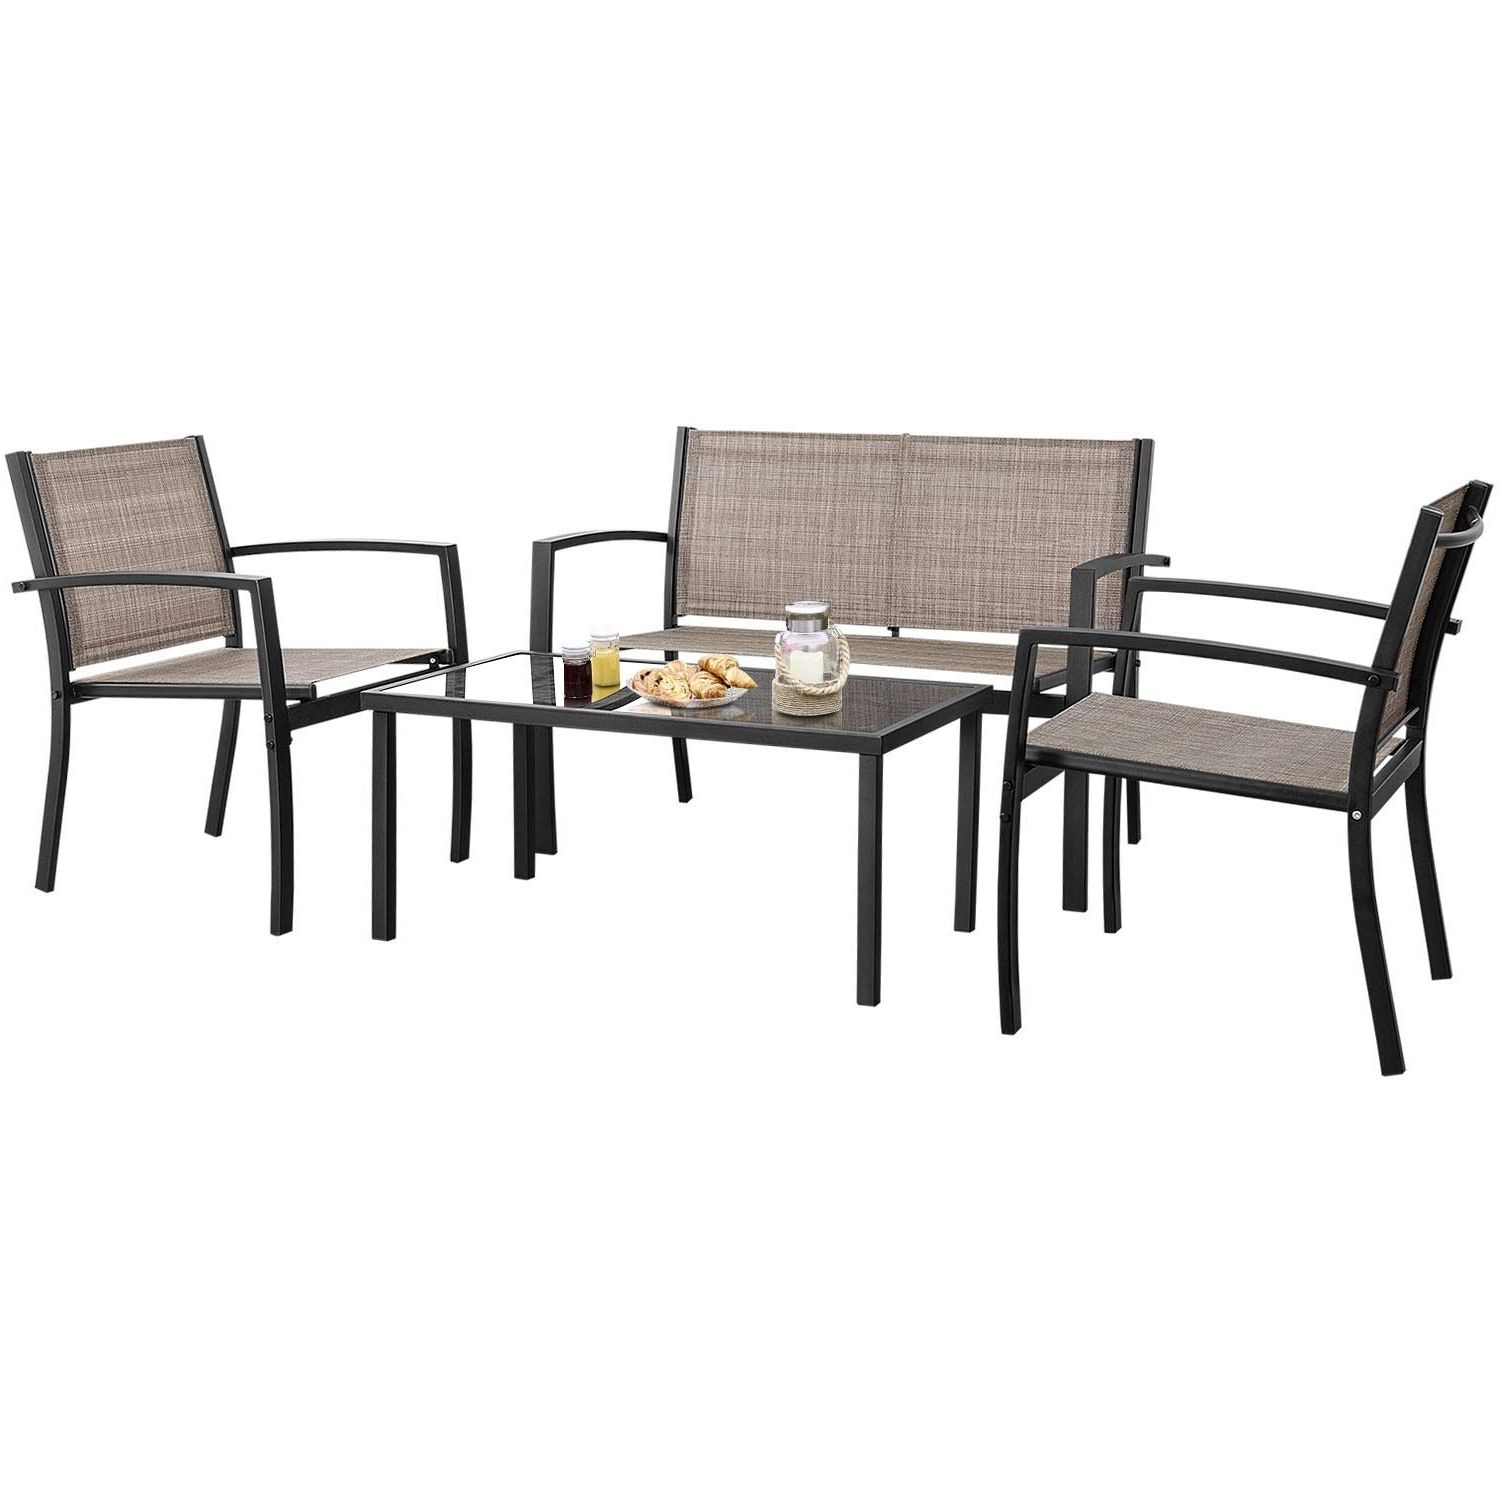 Newest Black Outdoor Modern Chairs Sets With Regard To Walnew 4 Pieces Patio Furniture Outdoor Furniture Outdoor Patio (View 9 of 15)